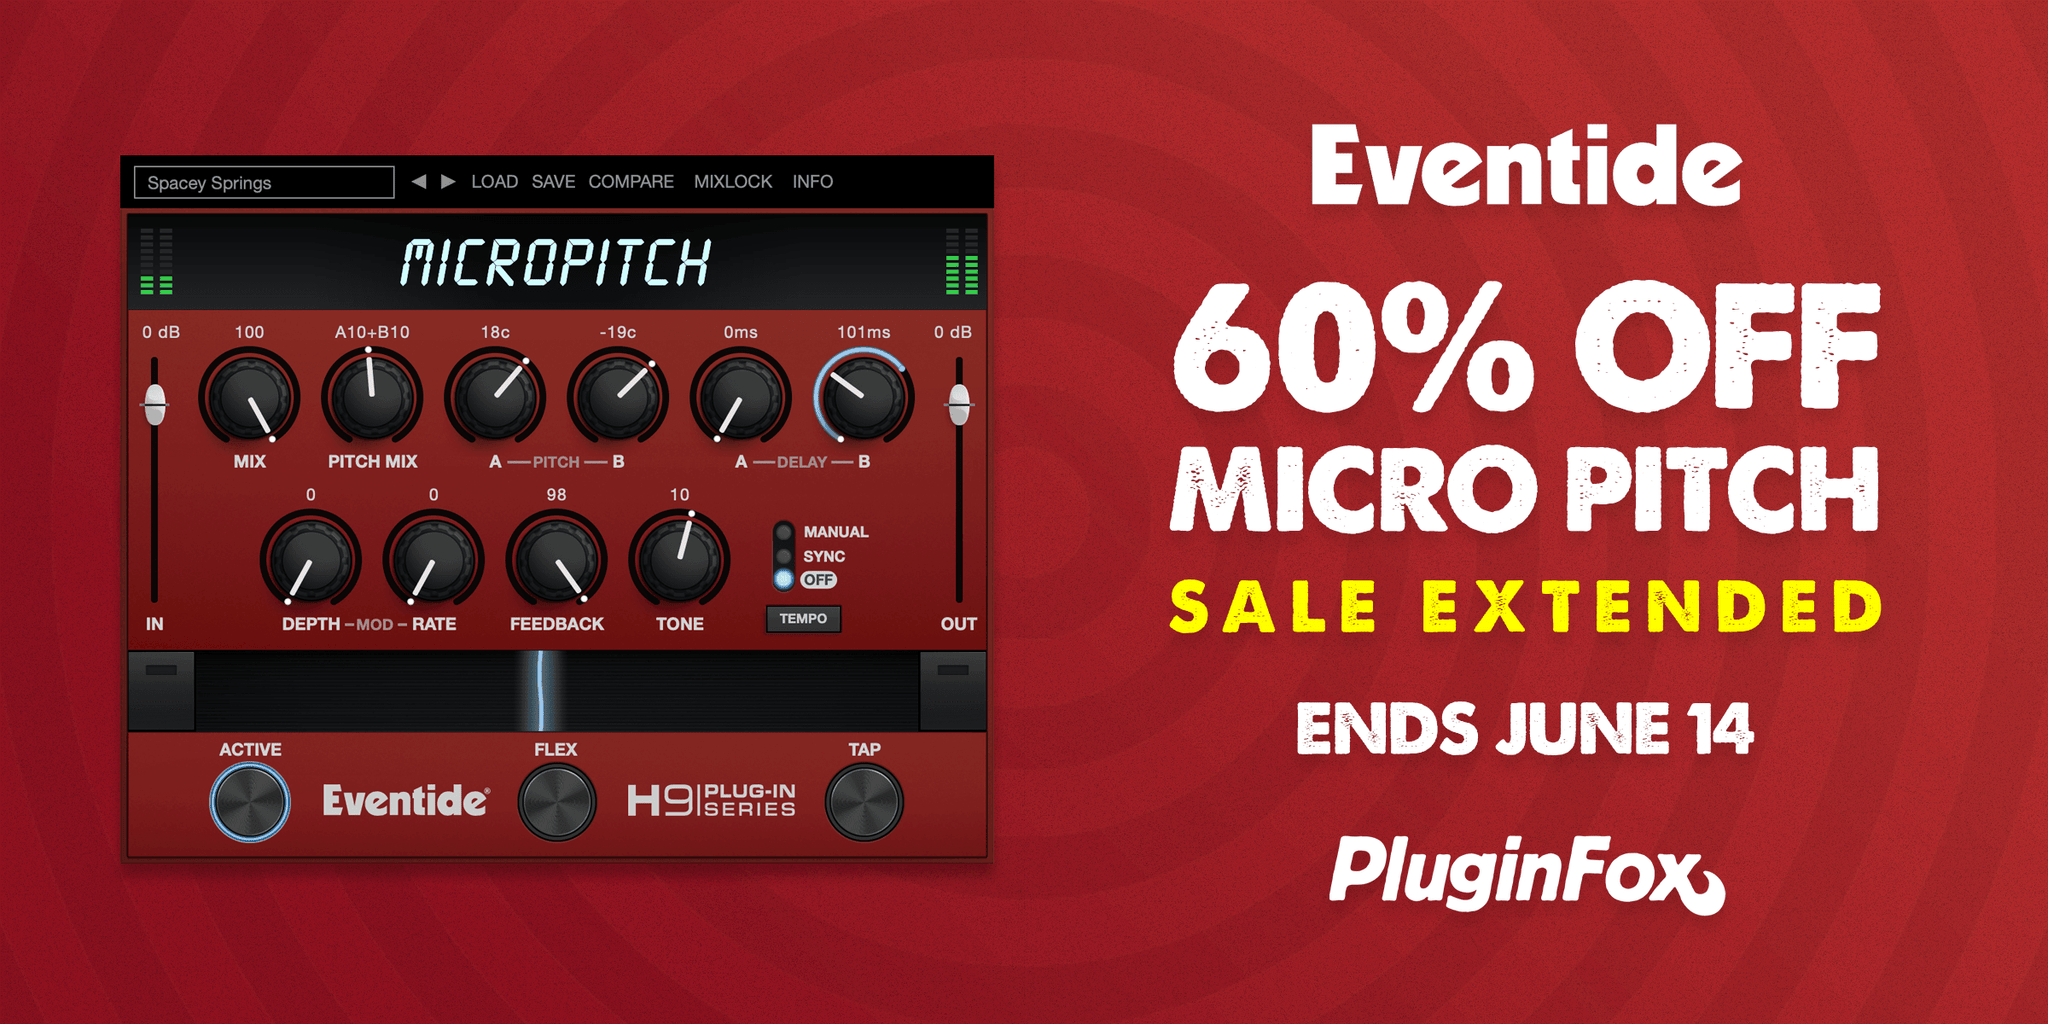 Eventide Micro Pitch Sale Extended - May 31 - June 14